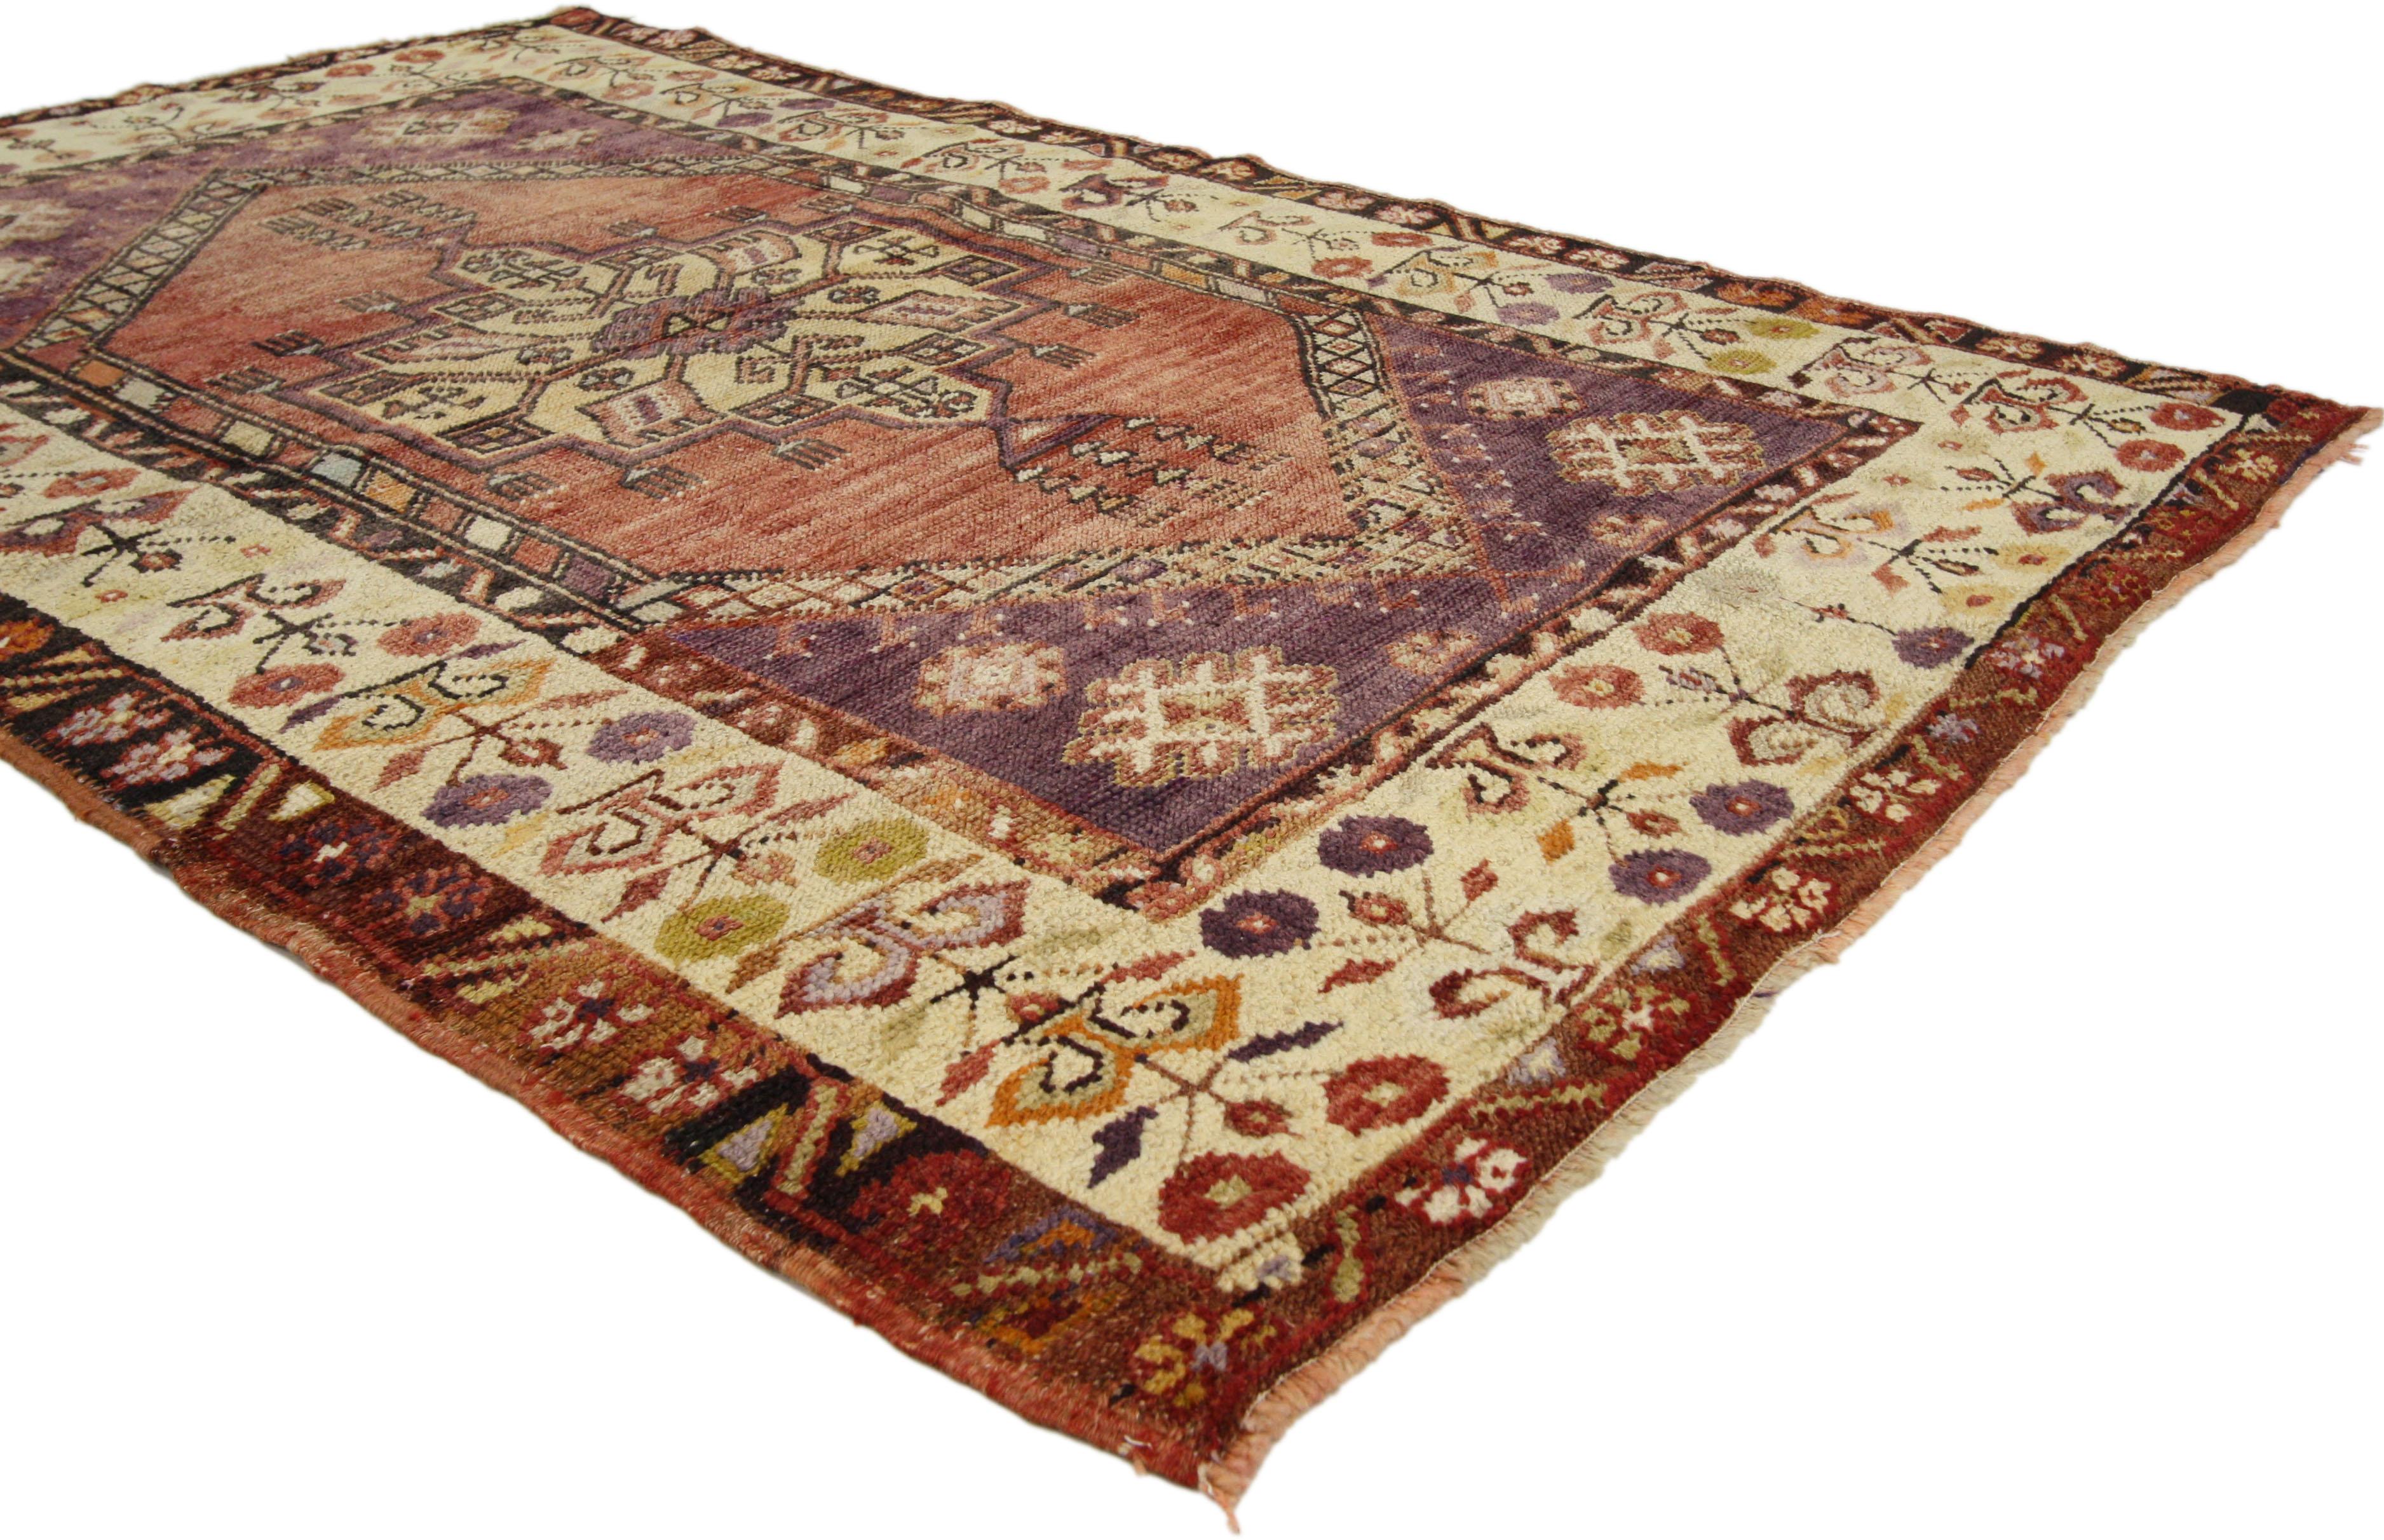 50314, vintage Turkish Oushak Accent rug, entry or foyer rug. This vintage Turkish Oushak rug features a modern traditional style. Immersed in Anatolian history and refined colors, this vintage Oushak rug combines simplicity with sophistication.